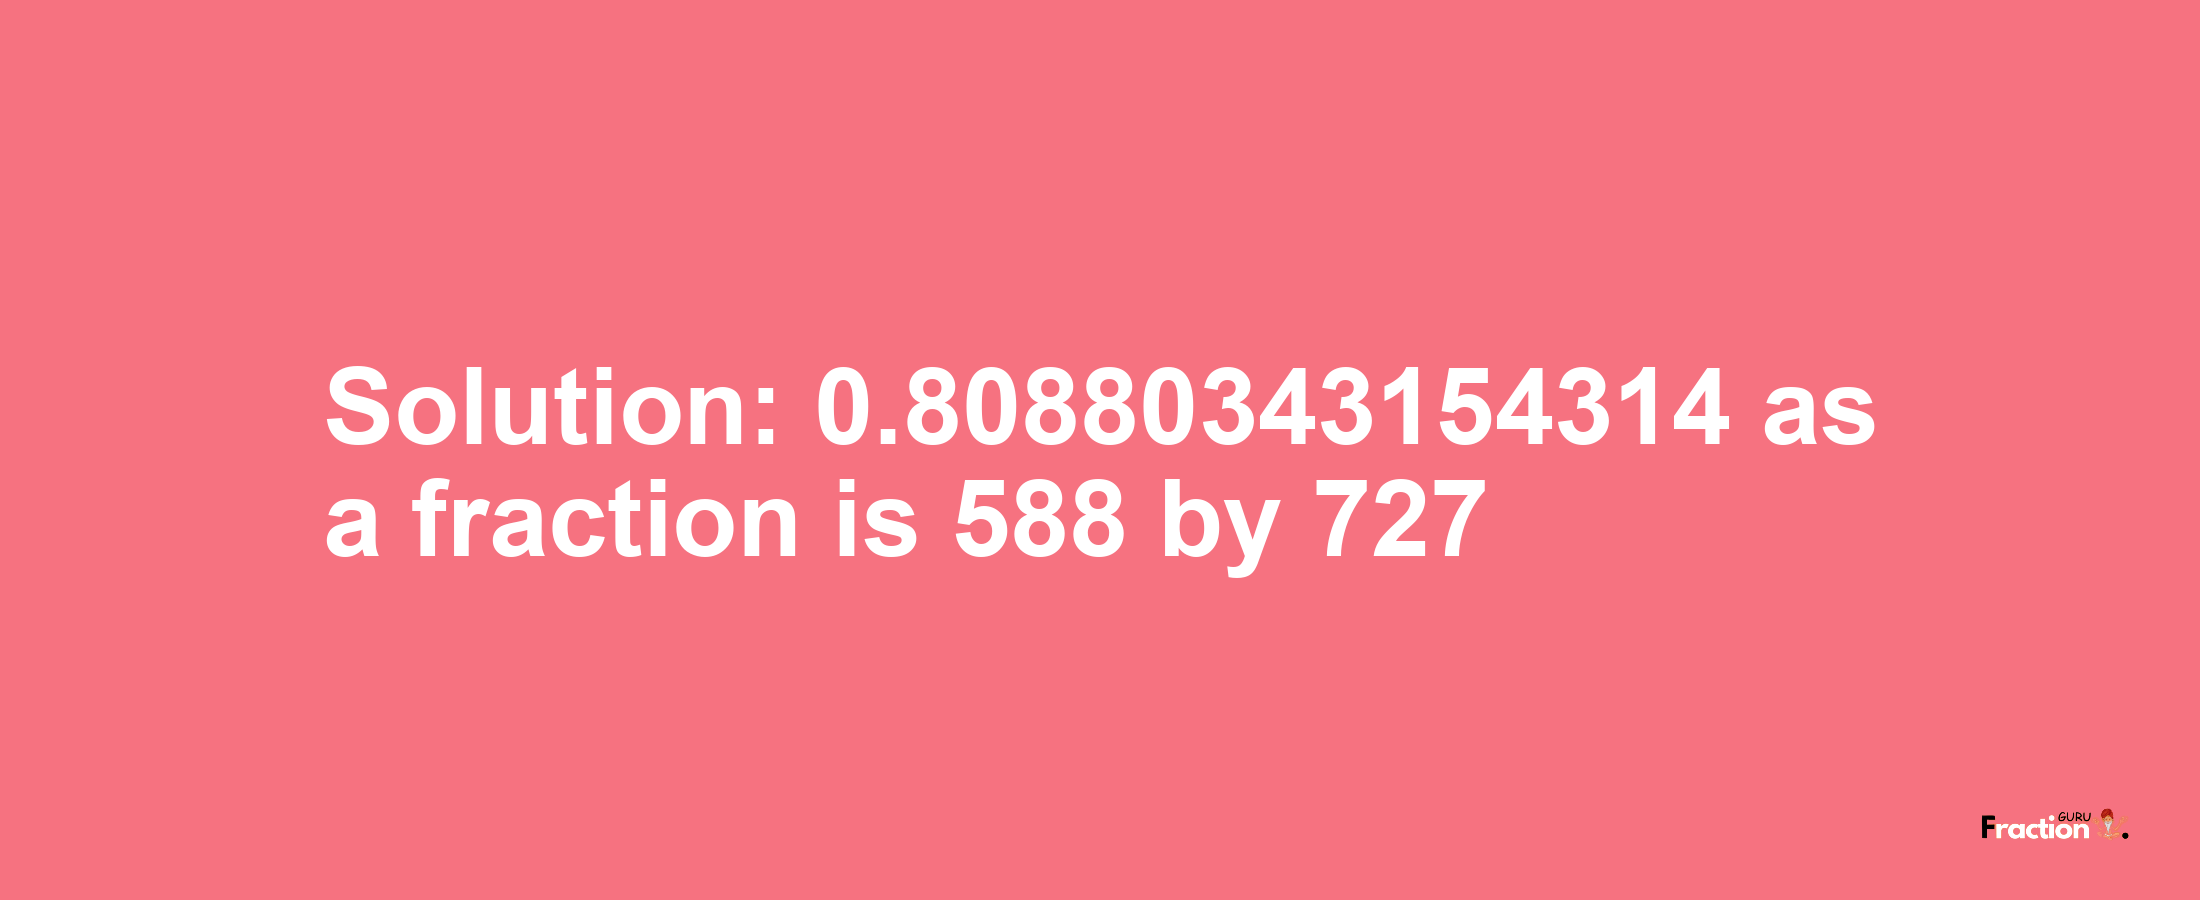 Solution:0.80880343154314 as a fraction is 588/727